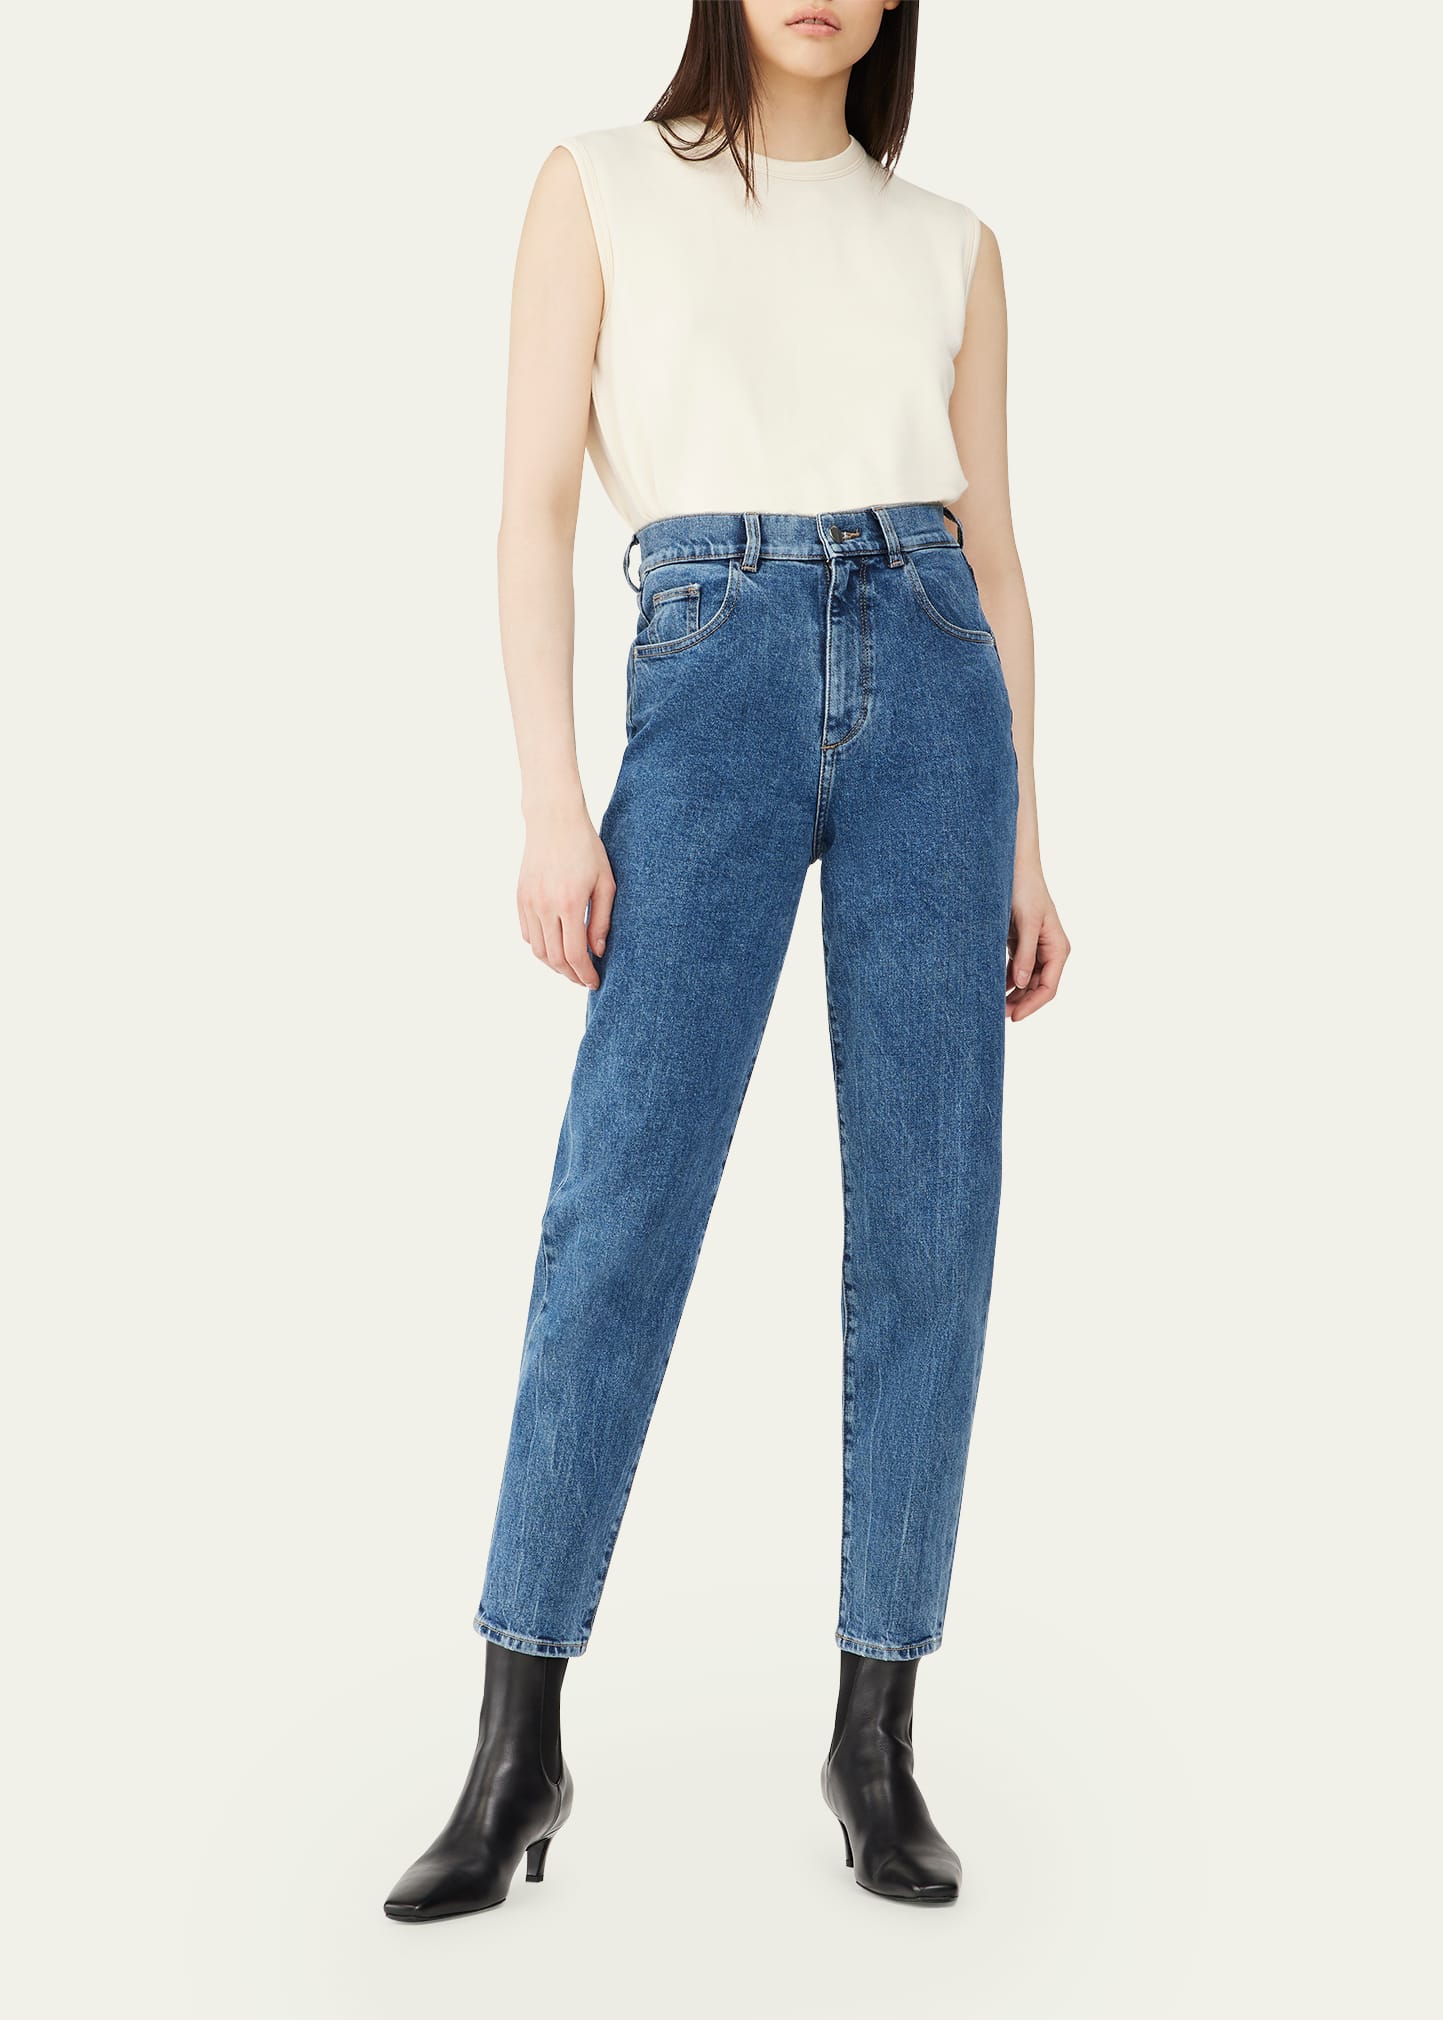 Sydney Tapered Straight Ankle Jeans